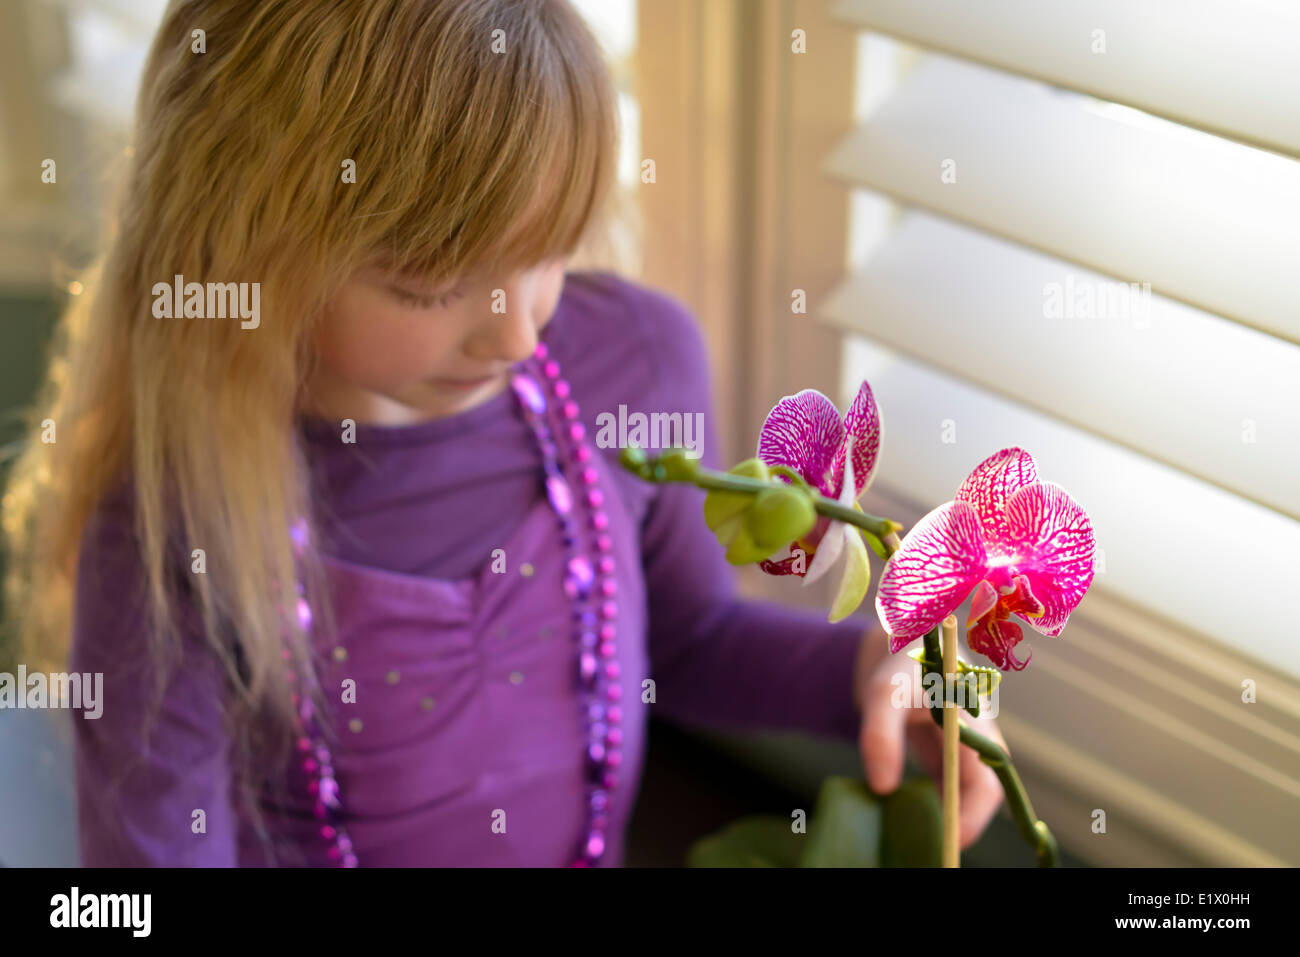 Young girl hanging out beside an orchid Stock Photo